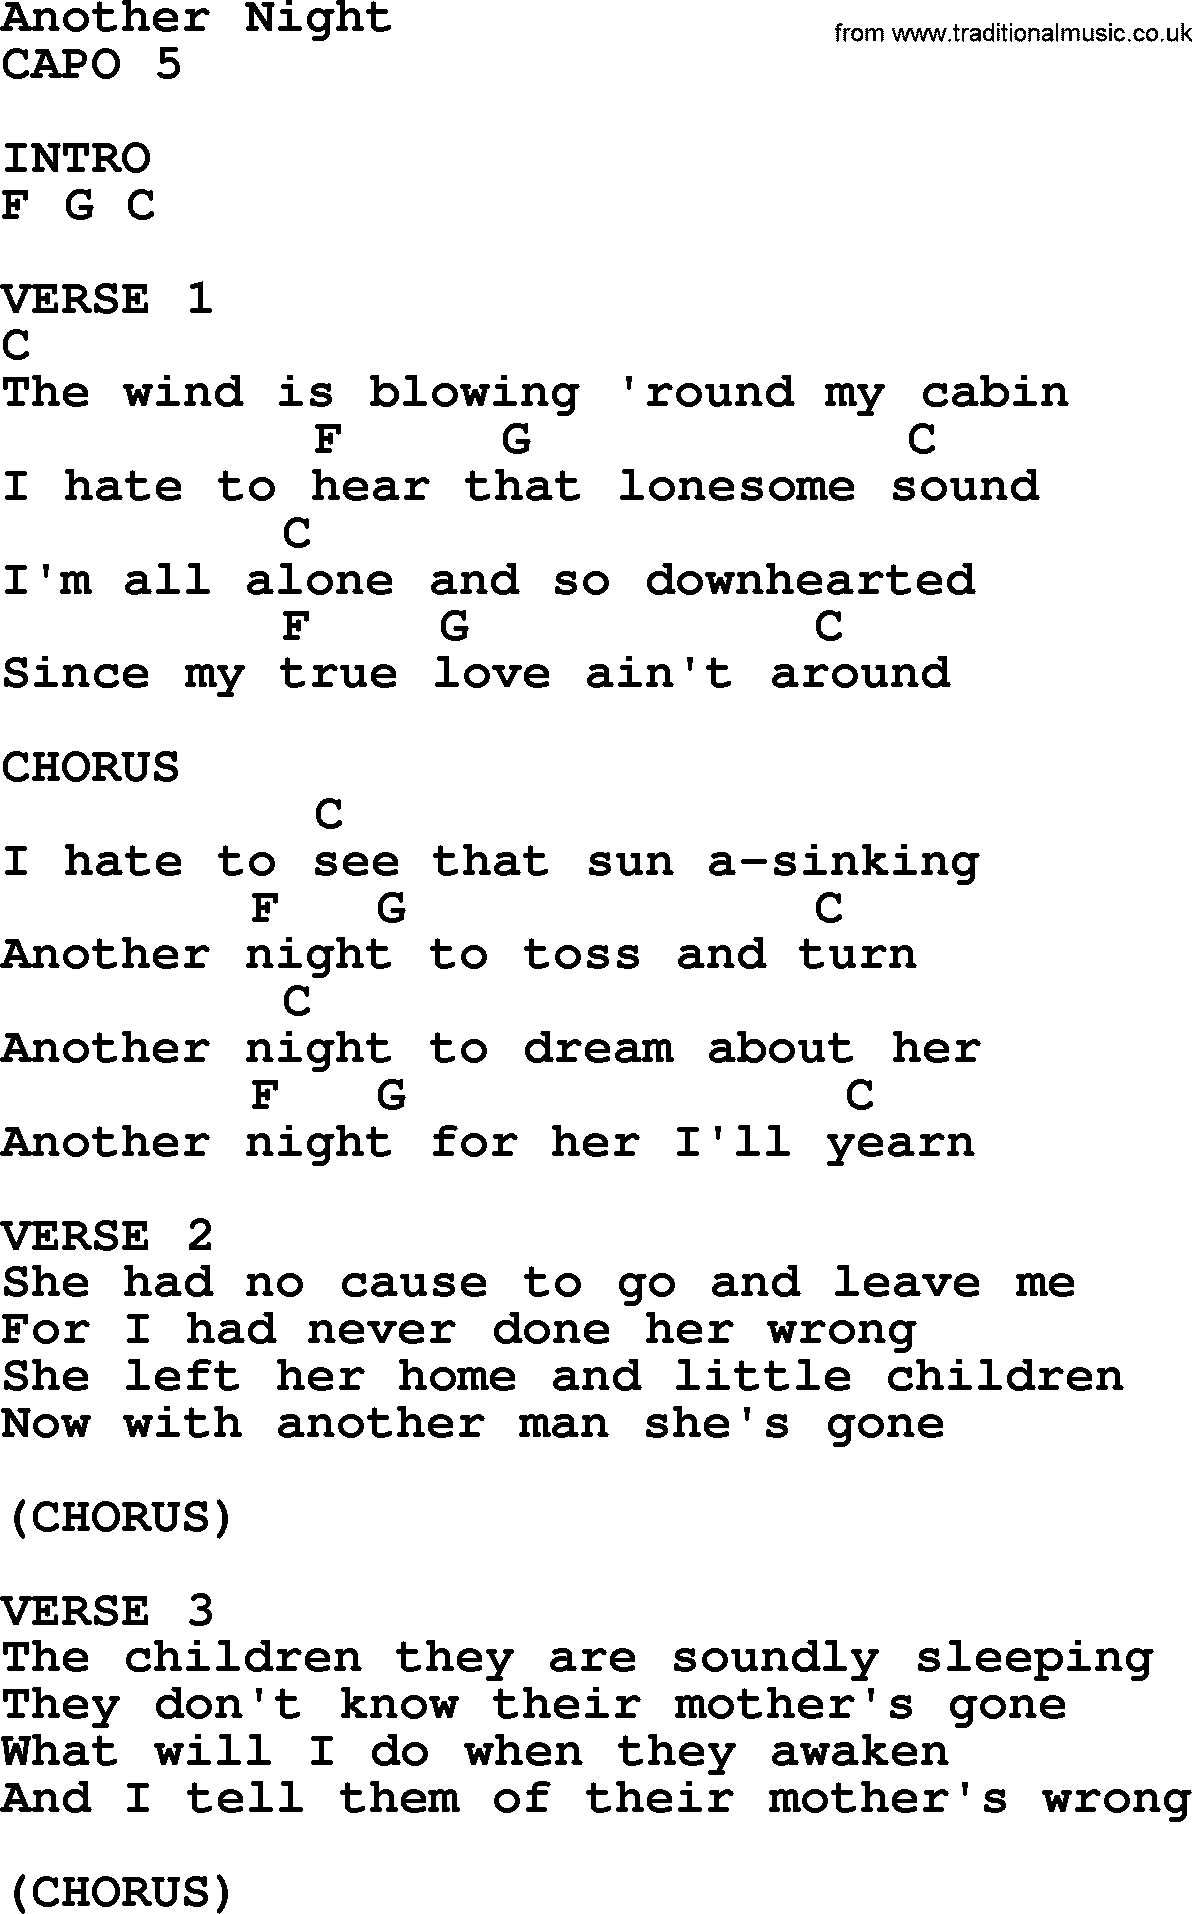 Bluegrass song: Another Night, lyrics and chords